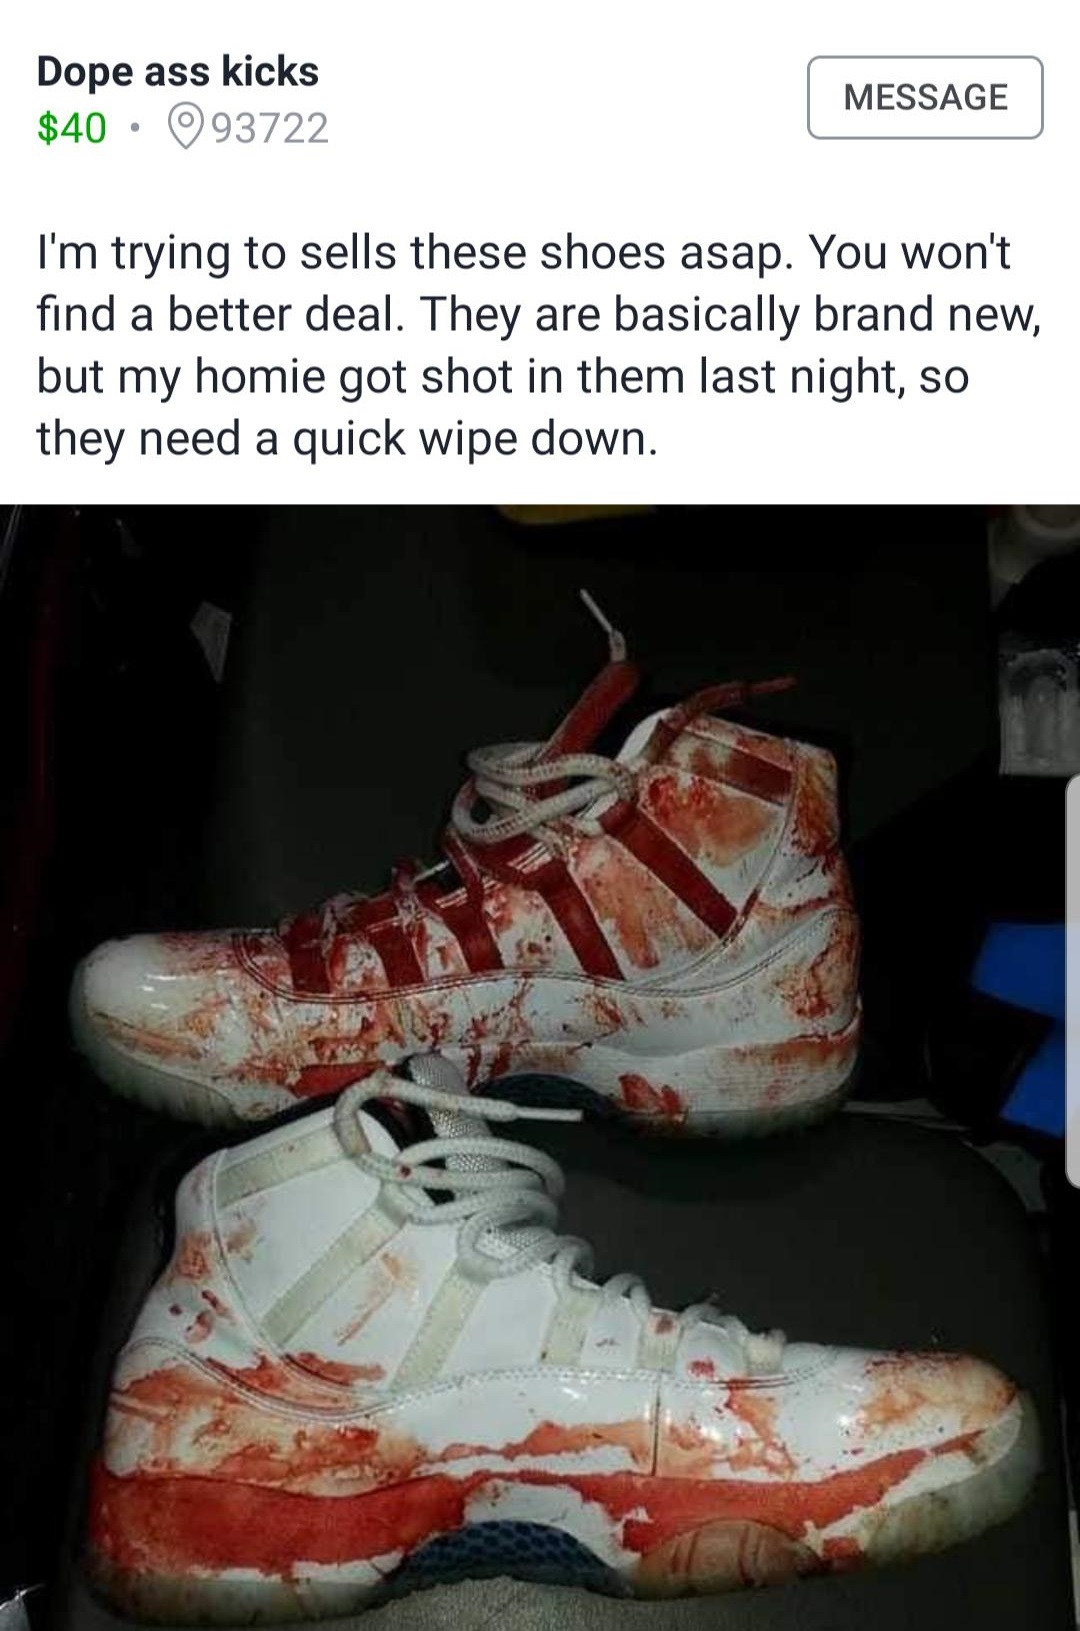 blood shoes - Dope ass kicks $40 093722 Message I'm trying to sells these shoes asap. You won't find a better deal. They are basically brand new, but my homie got shot in them last night, so they need a quick wipe down.